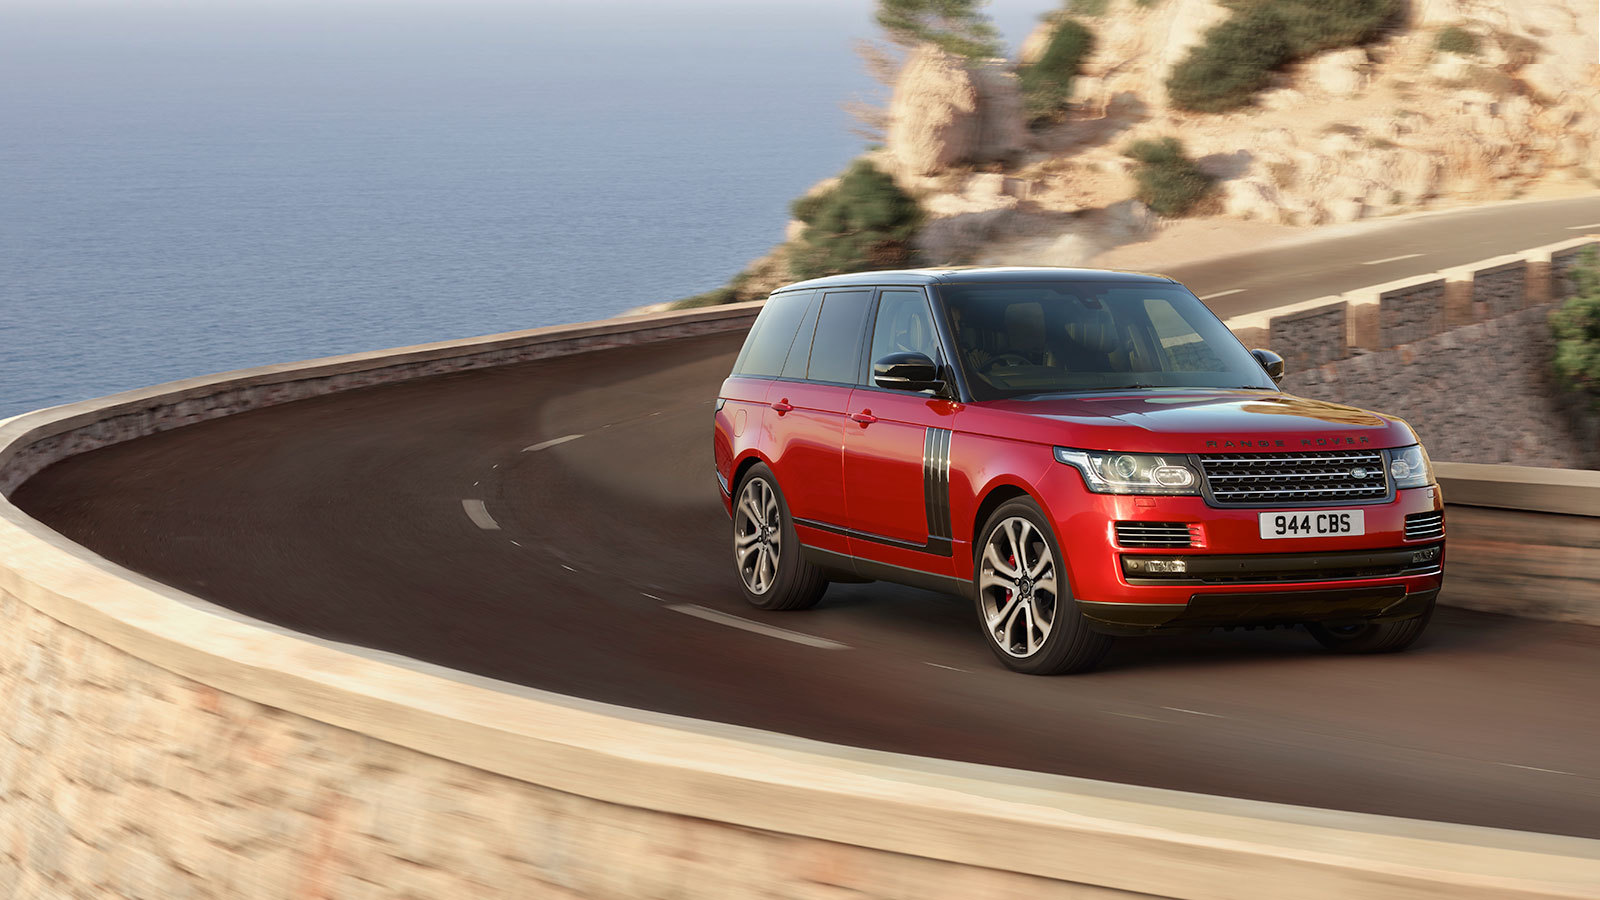 Range Rover SVAutobiography Launched in India at INR 2.79 Crore